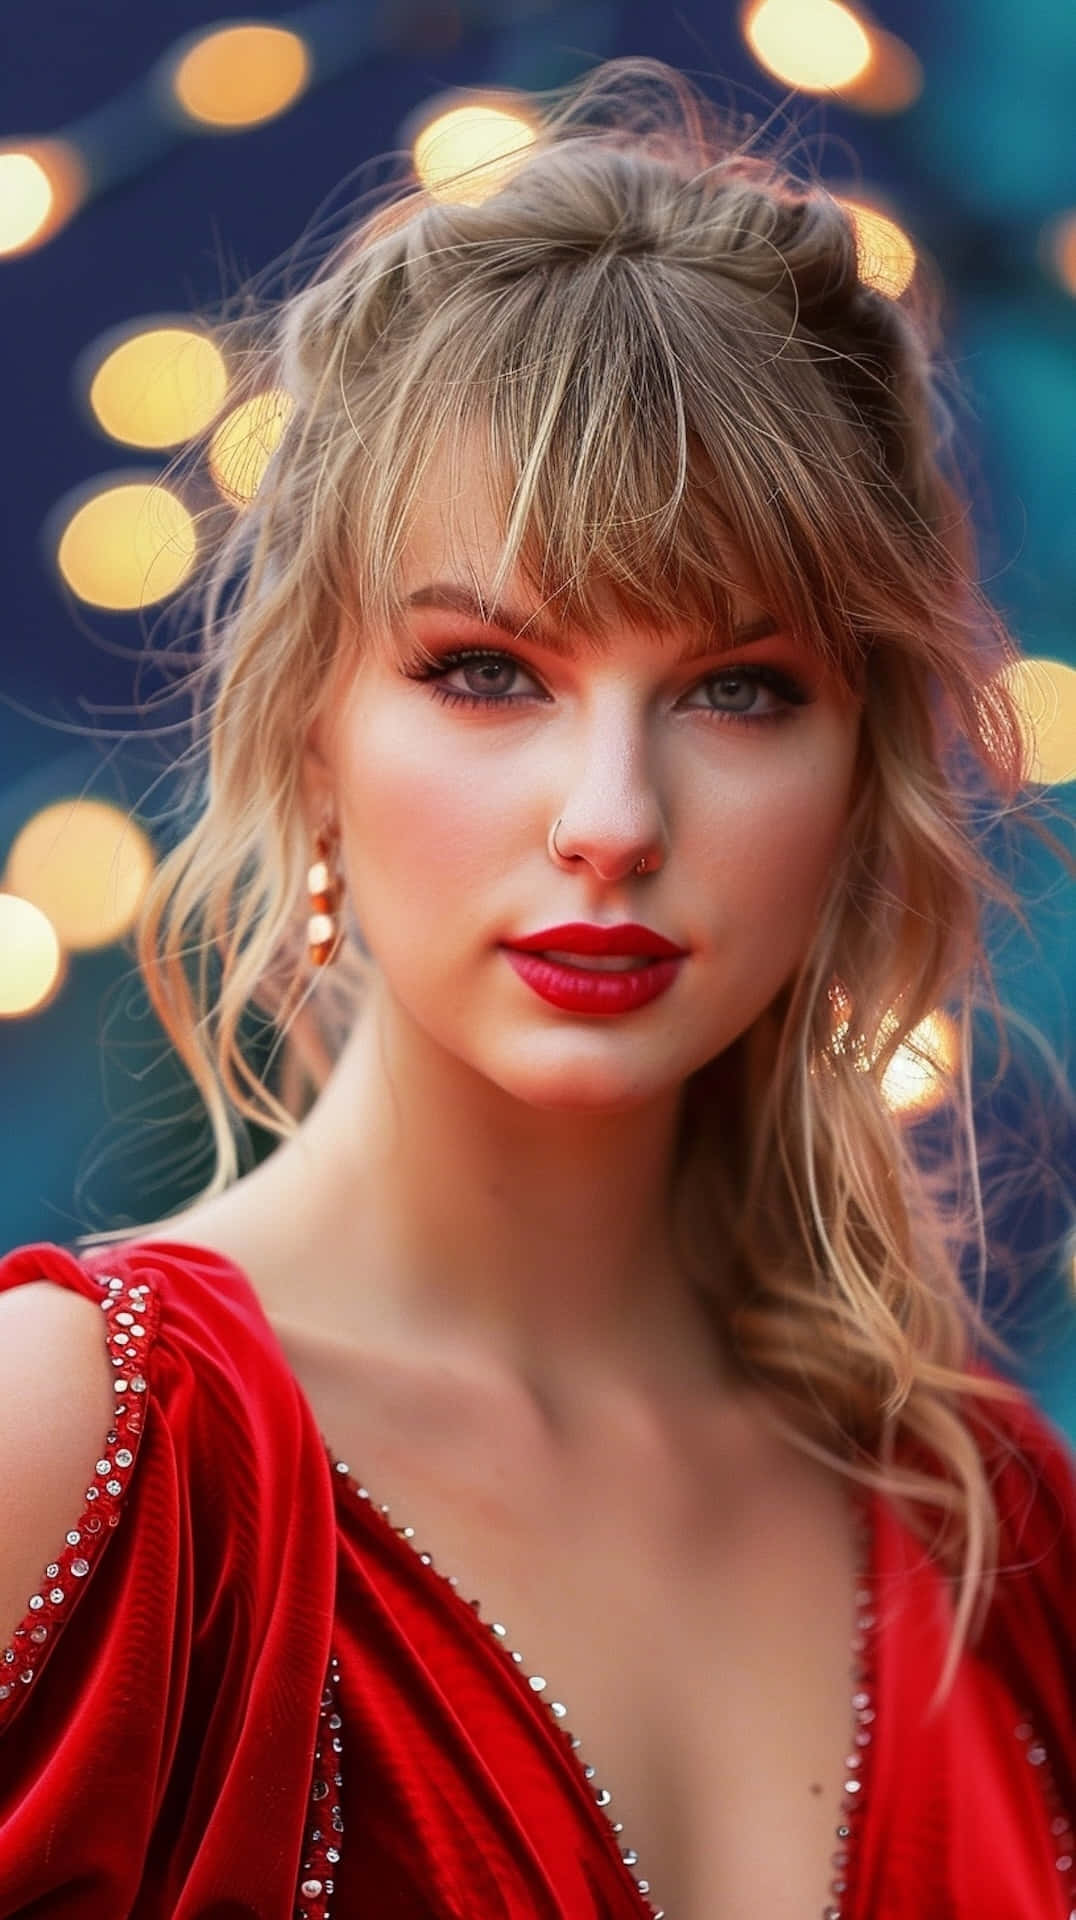 Taylor Swift Red Dress Christmas Vibes Wallpaper